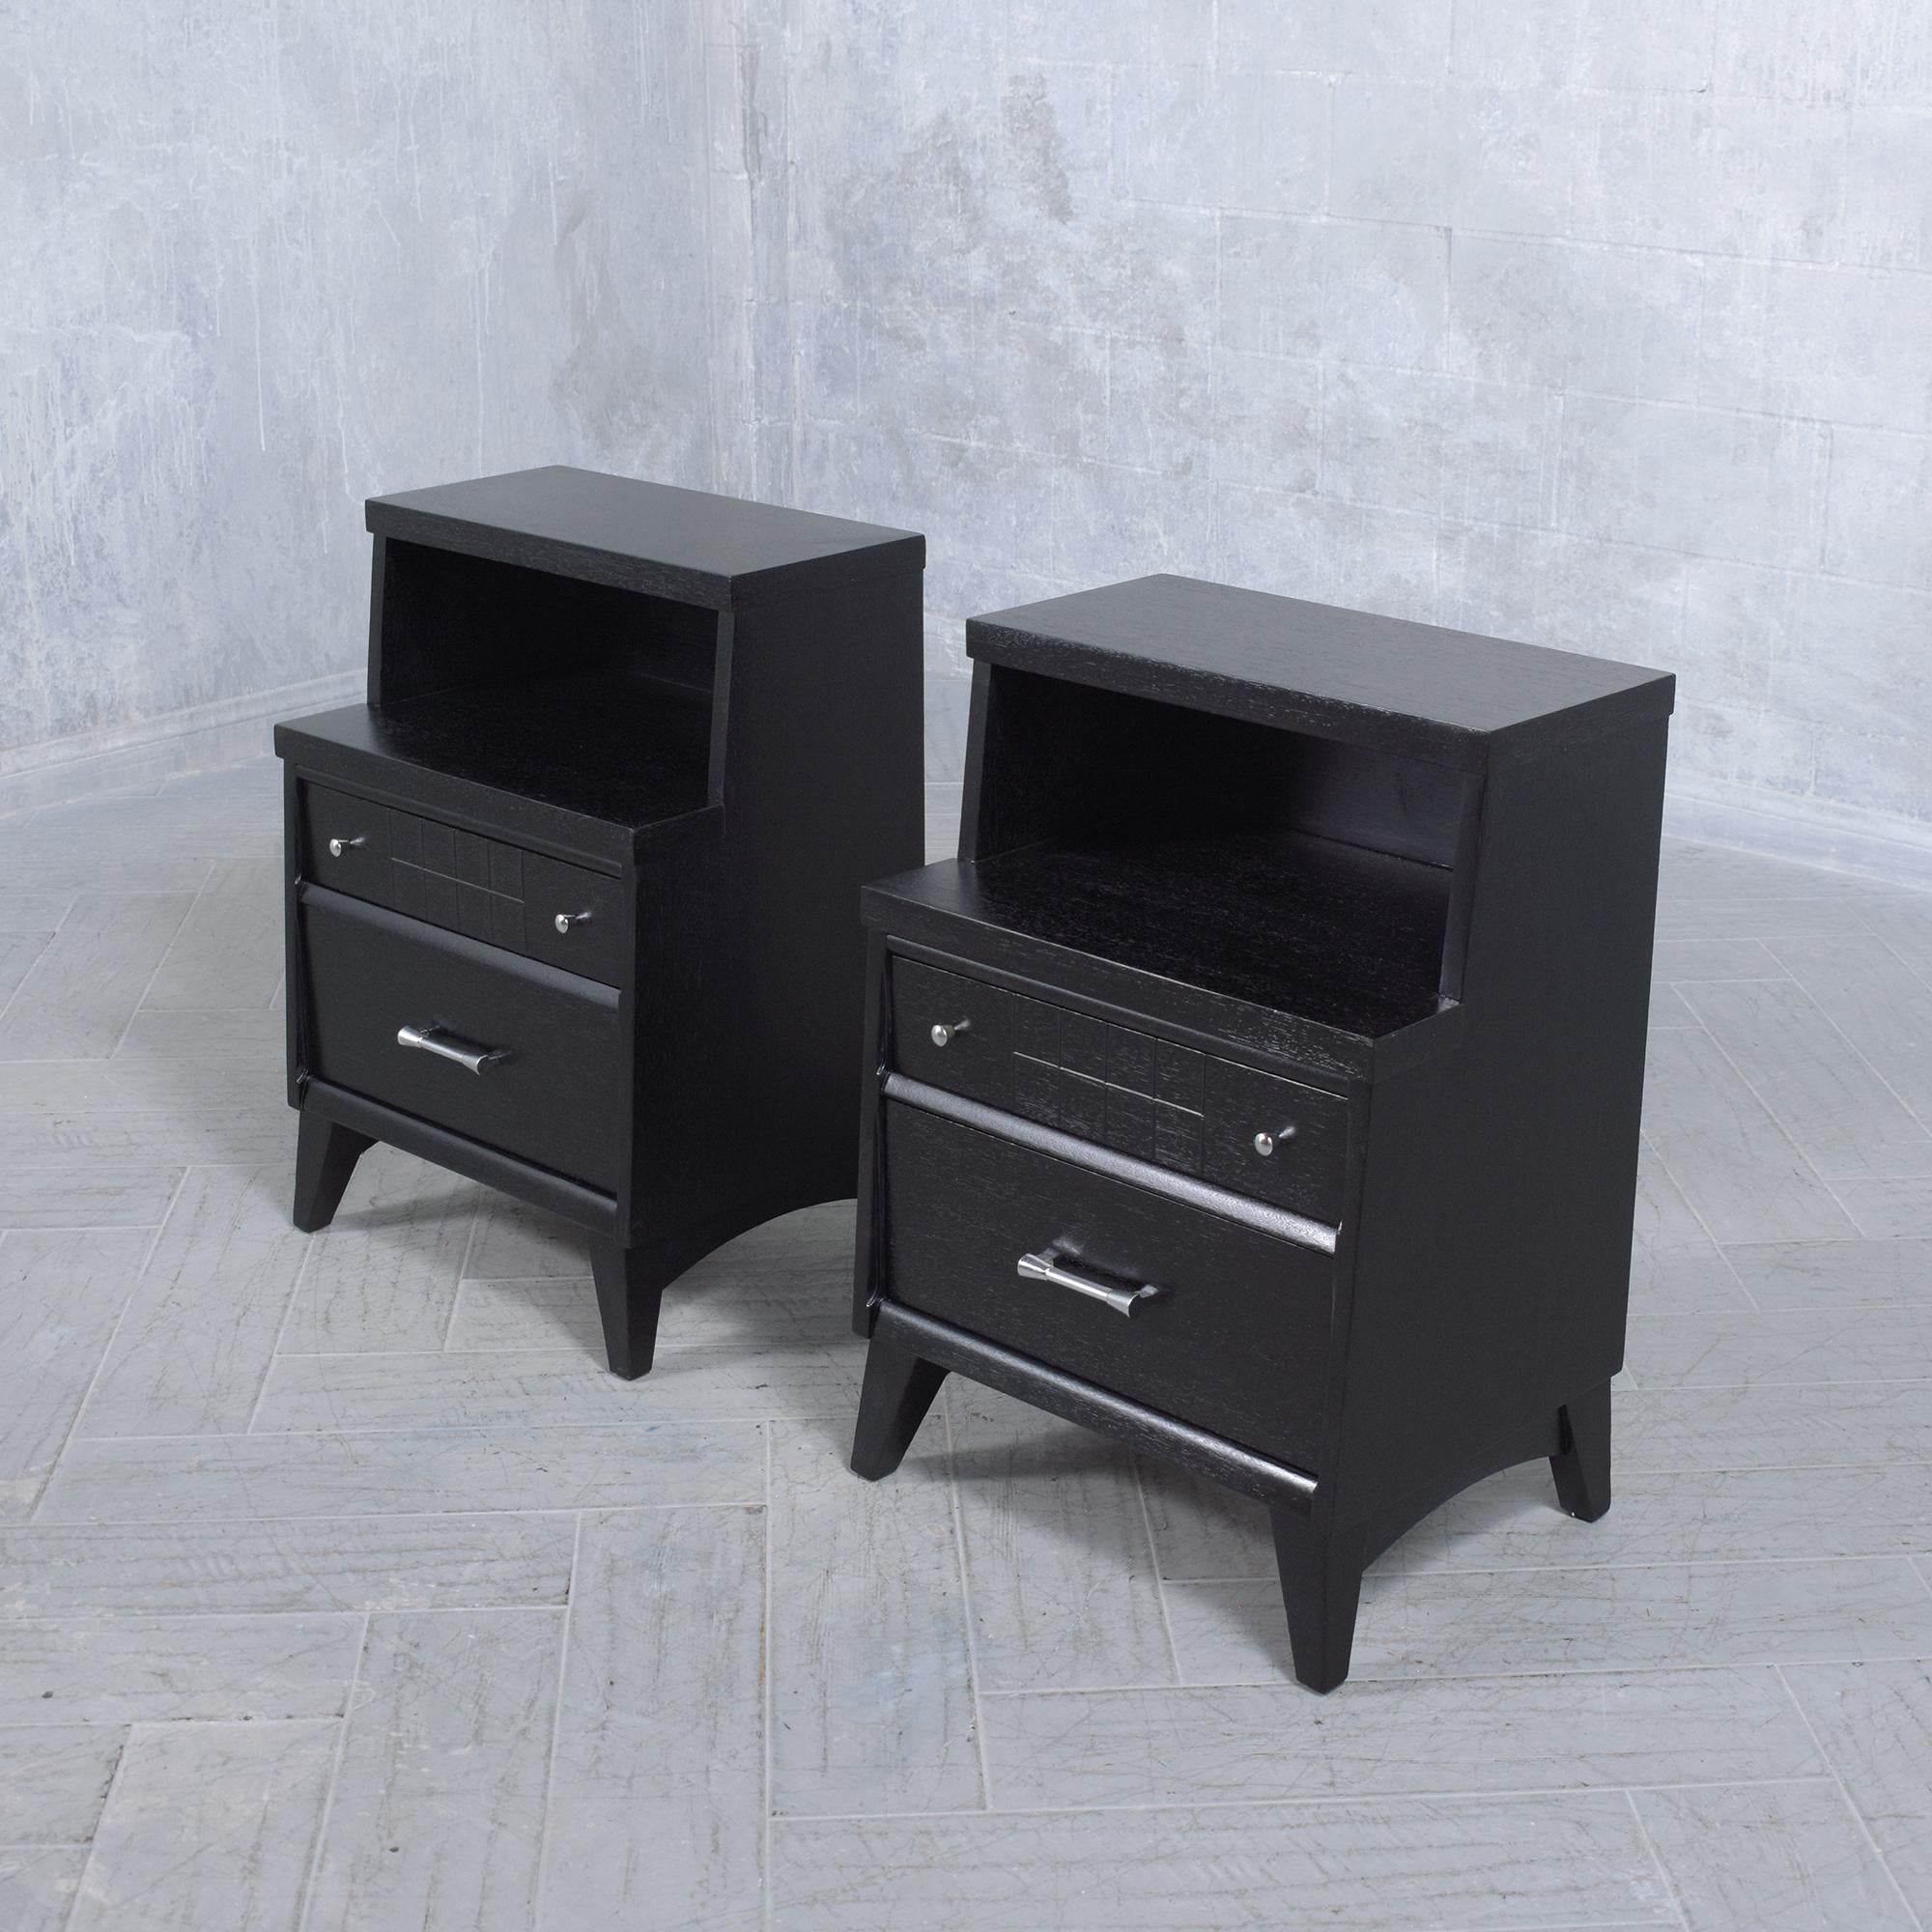 Mid-20th Century Vintage Mid-Century Modern Nightstands with Ebonized Finish and Chrome Hardware For Sale